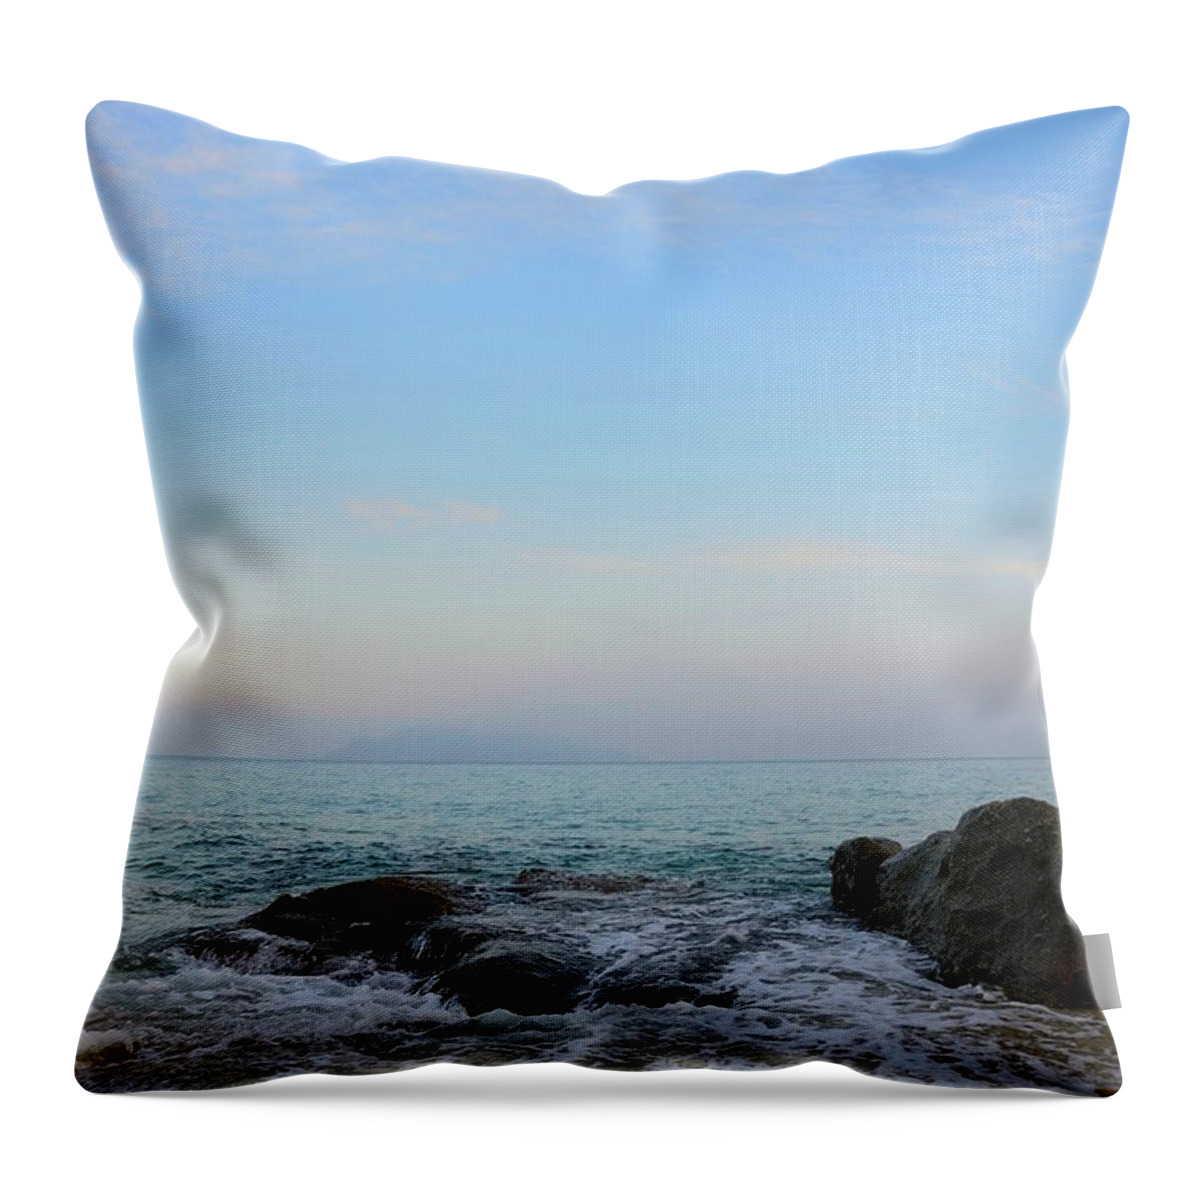 Tranquility Throw Pillow featuring the photograph Inakahama Beach At Sunrise by Electravk